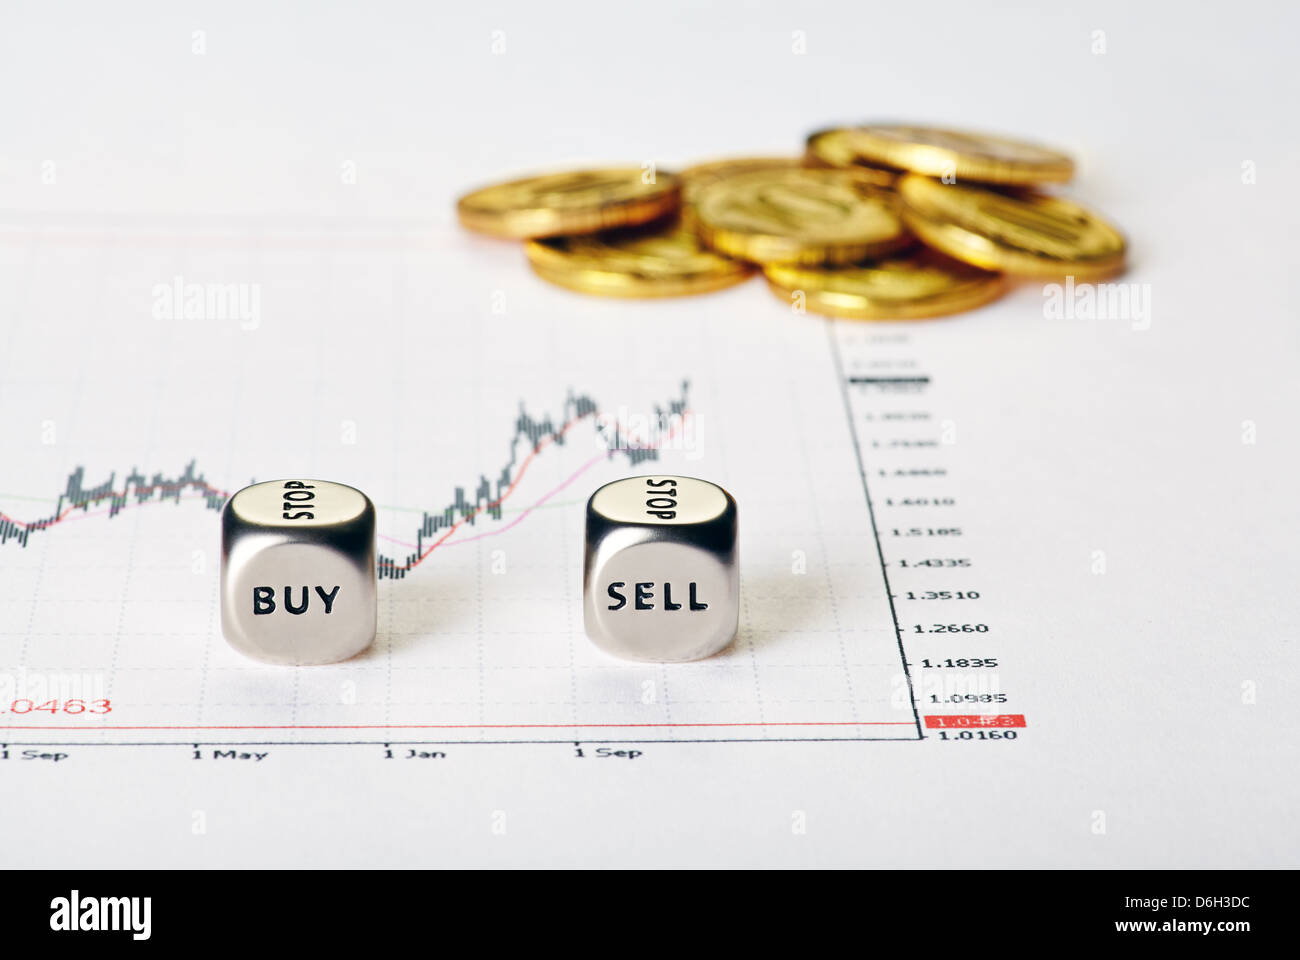 Financial settlement with the charts, coins and dices cubes with the words BUY SELL. Selective focus Stock Photo